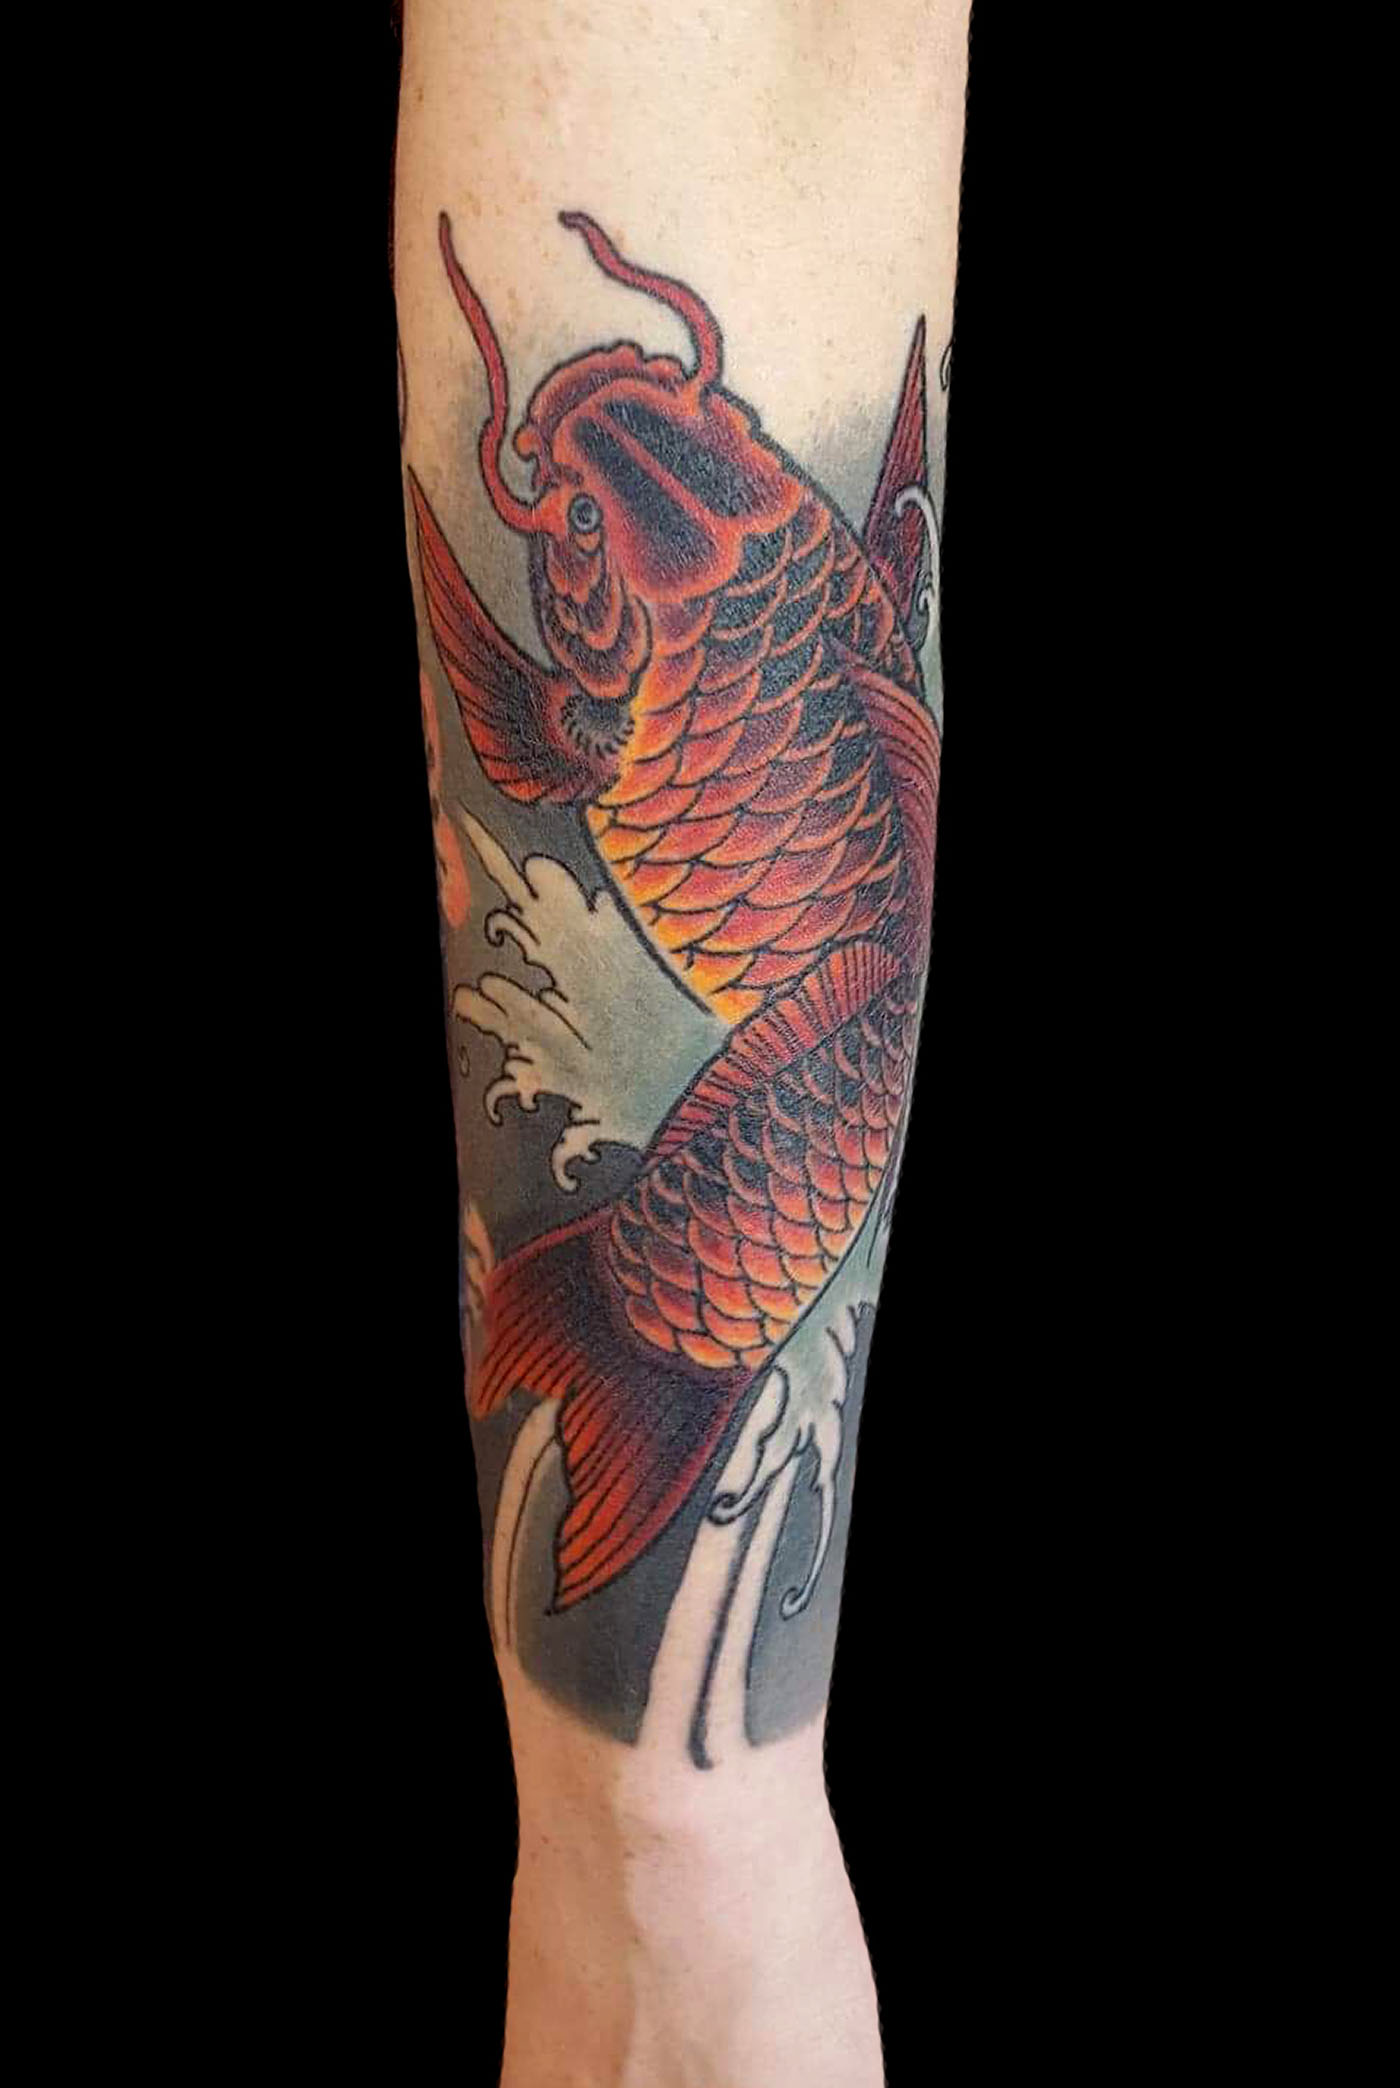 Subtle Red and Orange Koi Fish on Your Forearm